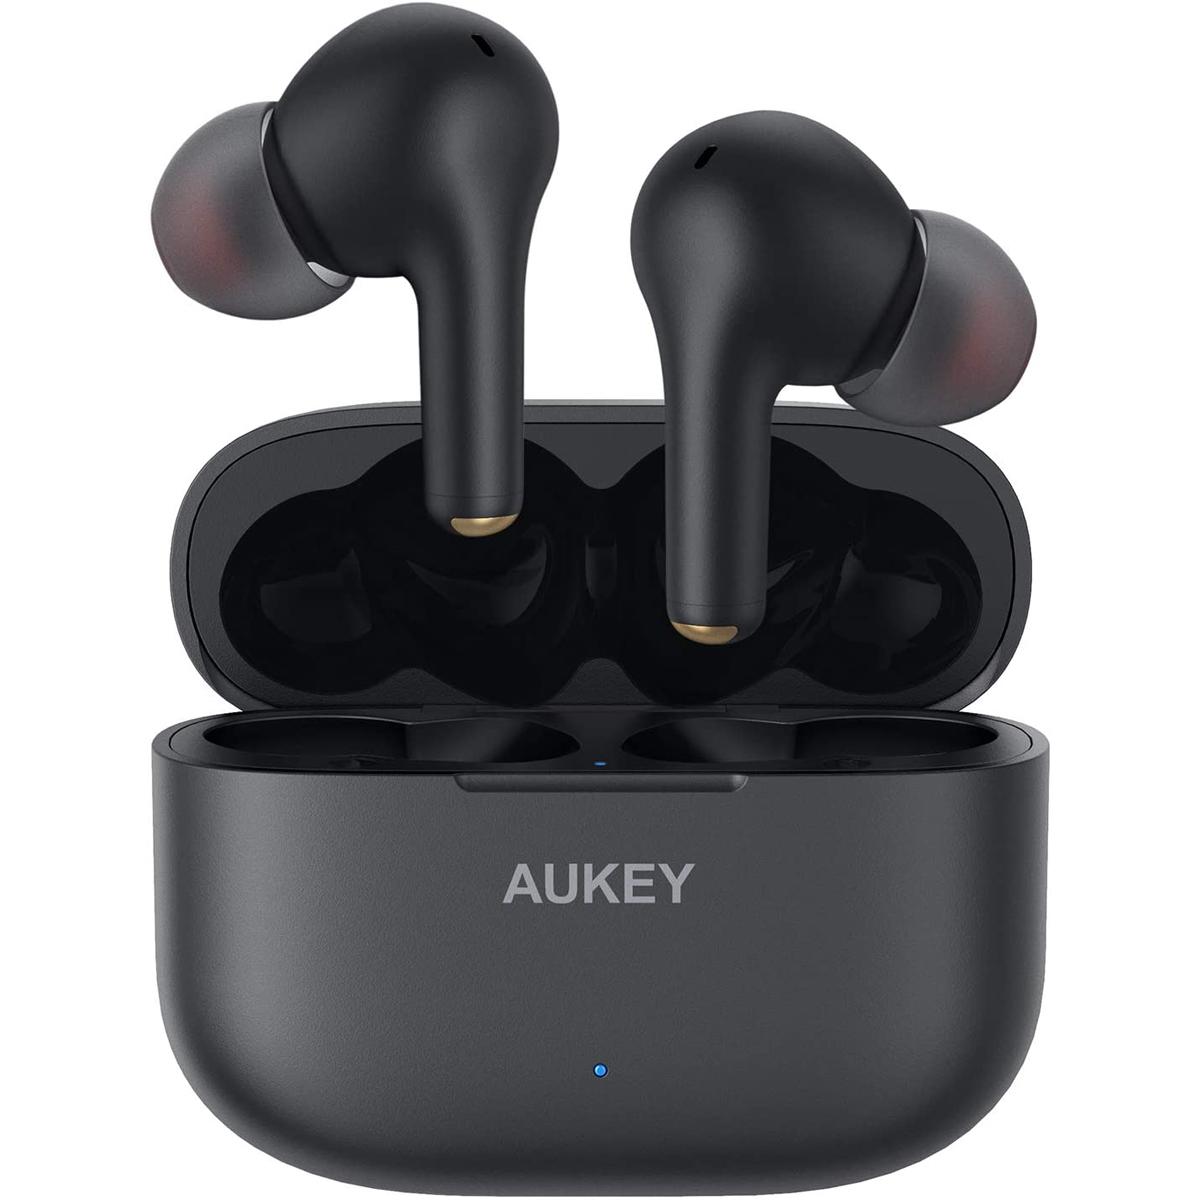 Aukey EP-T27 True Wireless Bluetooth 5 IPX7 Waterproof Earbuds for $27.49 Shipped